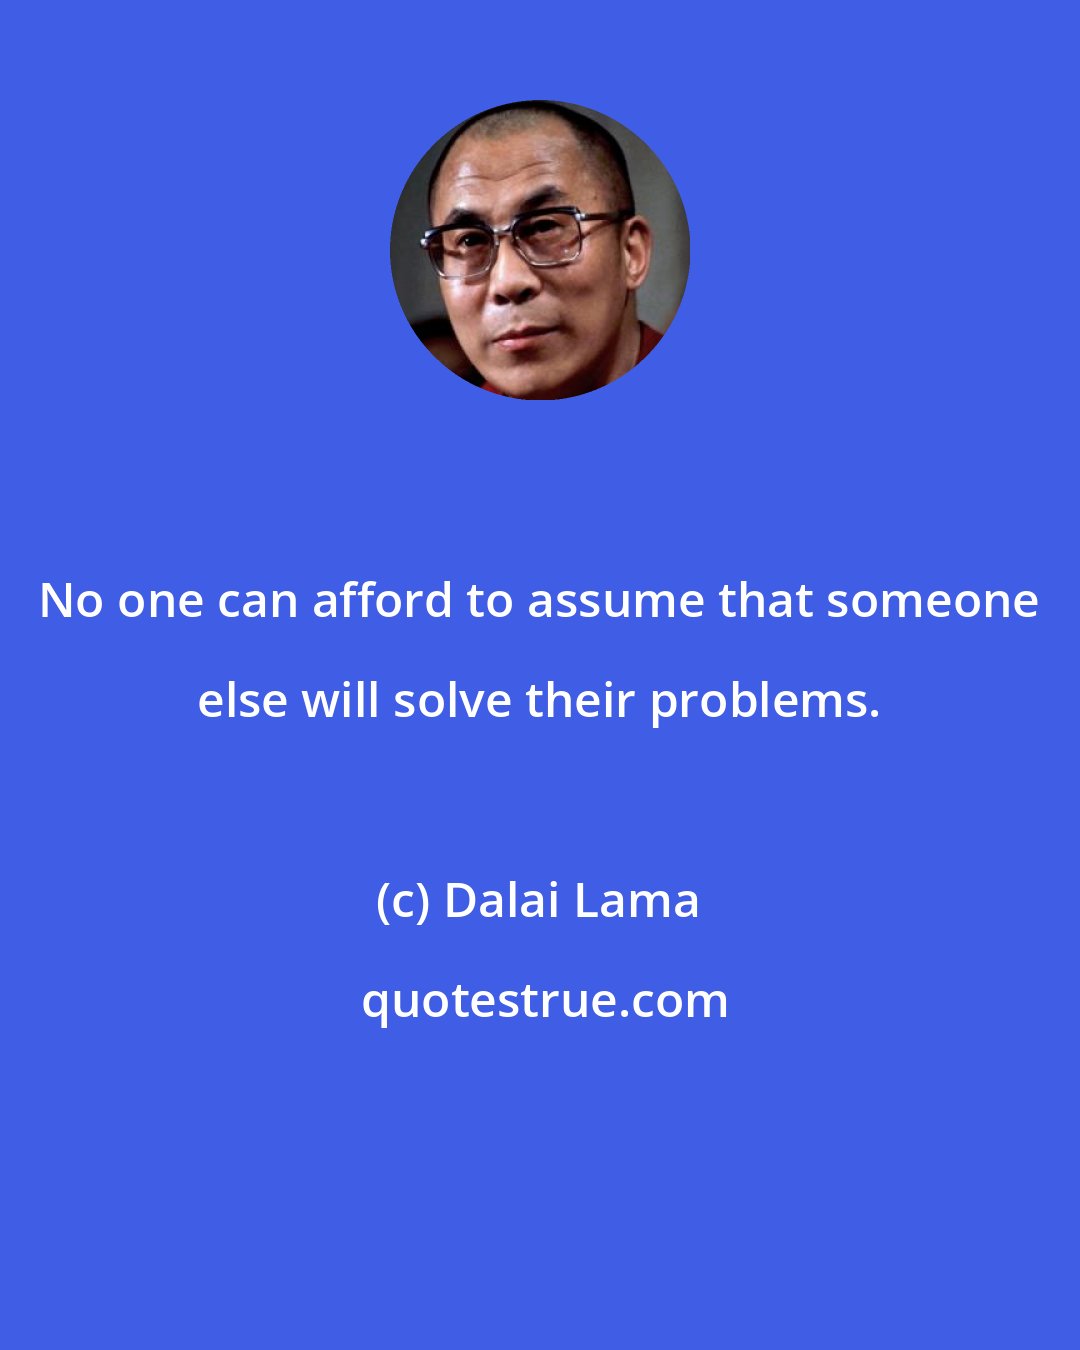 Dalai Lama: No one can afford to assume that someone else will solve their problems.